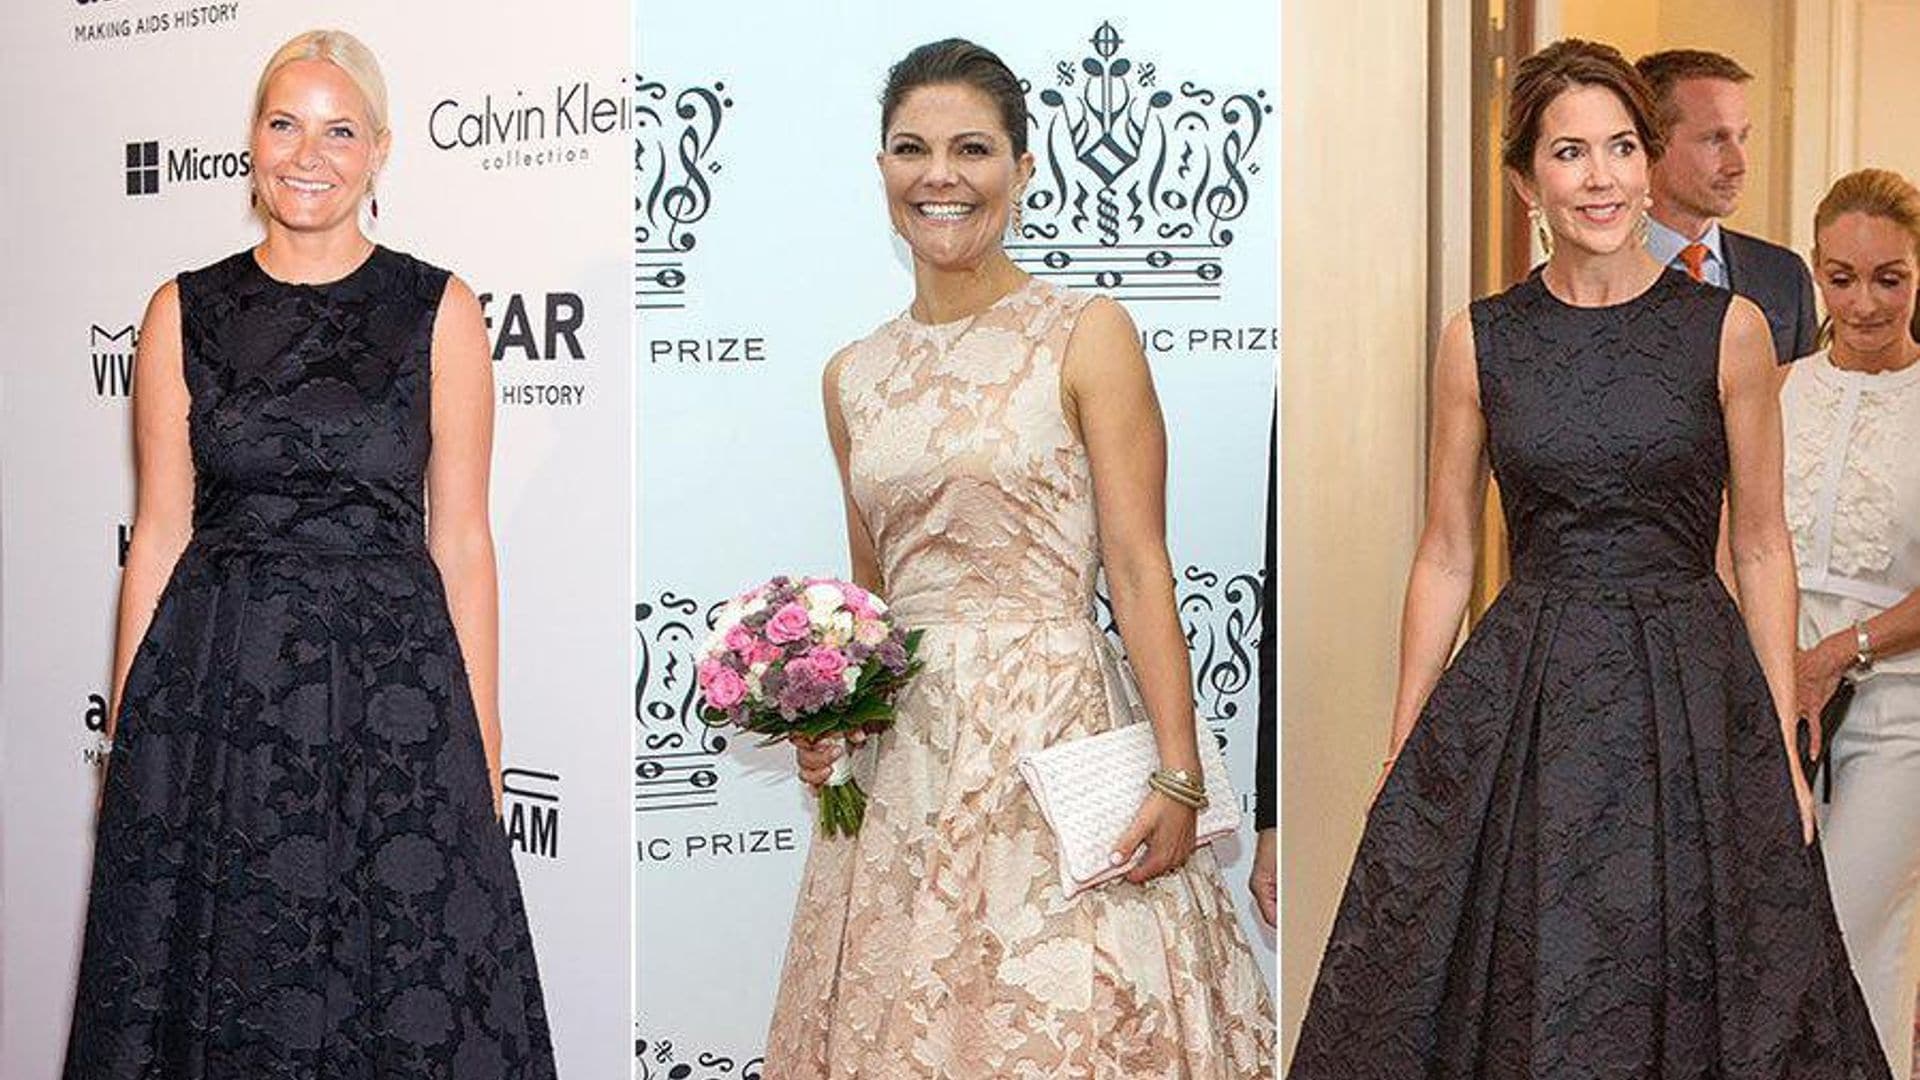 Europe's princesses love this affordable dress – but who do you think wore it best?